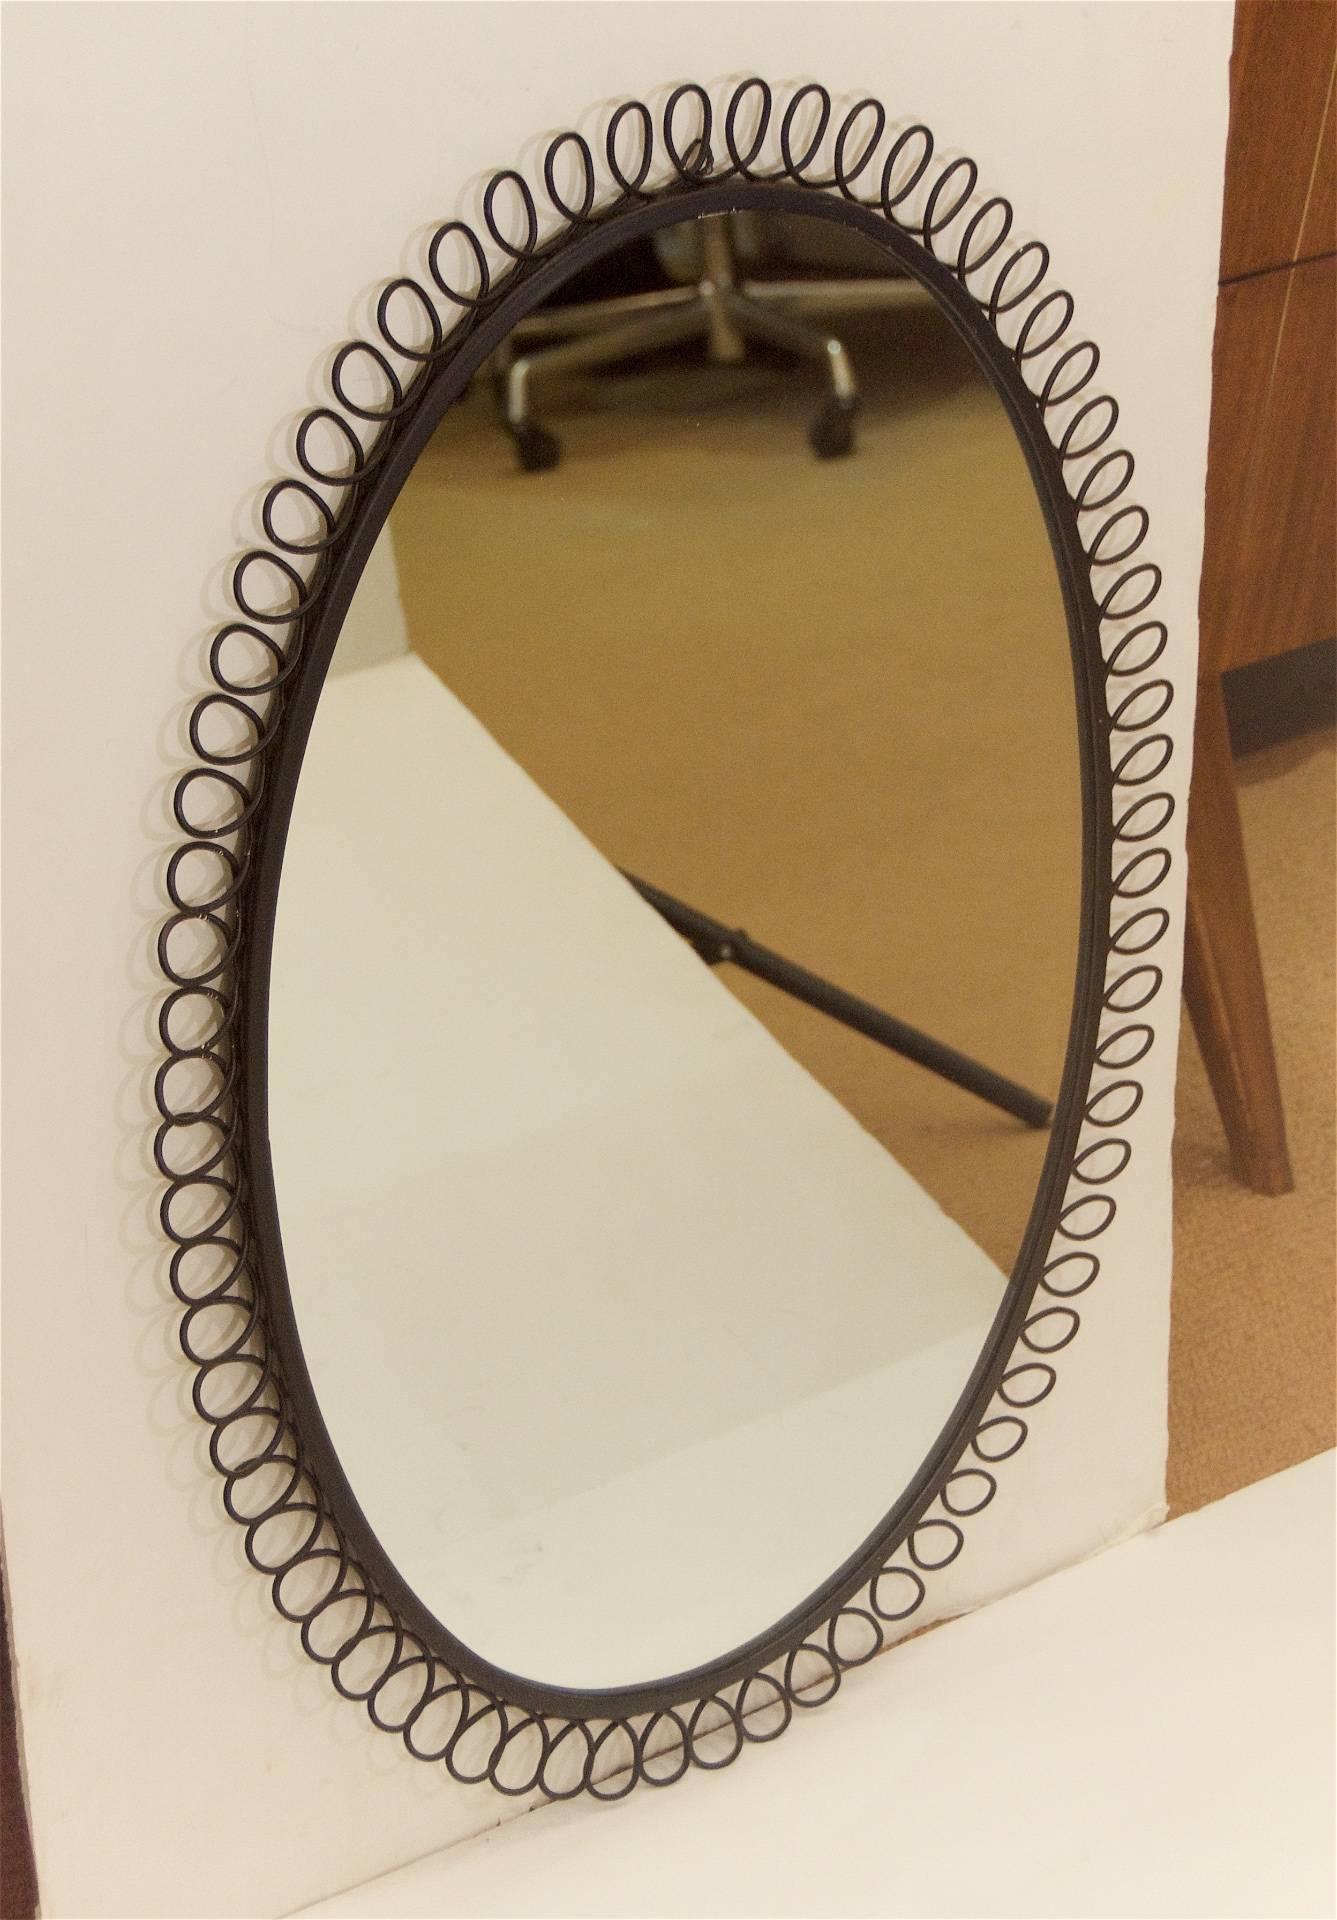 Nicely proportioned mirror in the style of Josef Frank, the oval mirror mounted in a black enameled steel frame with a spiral wire border.